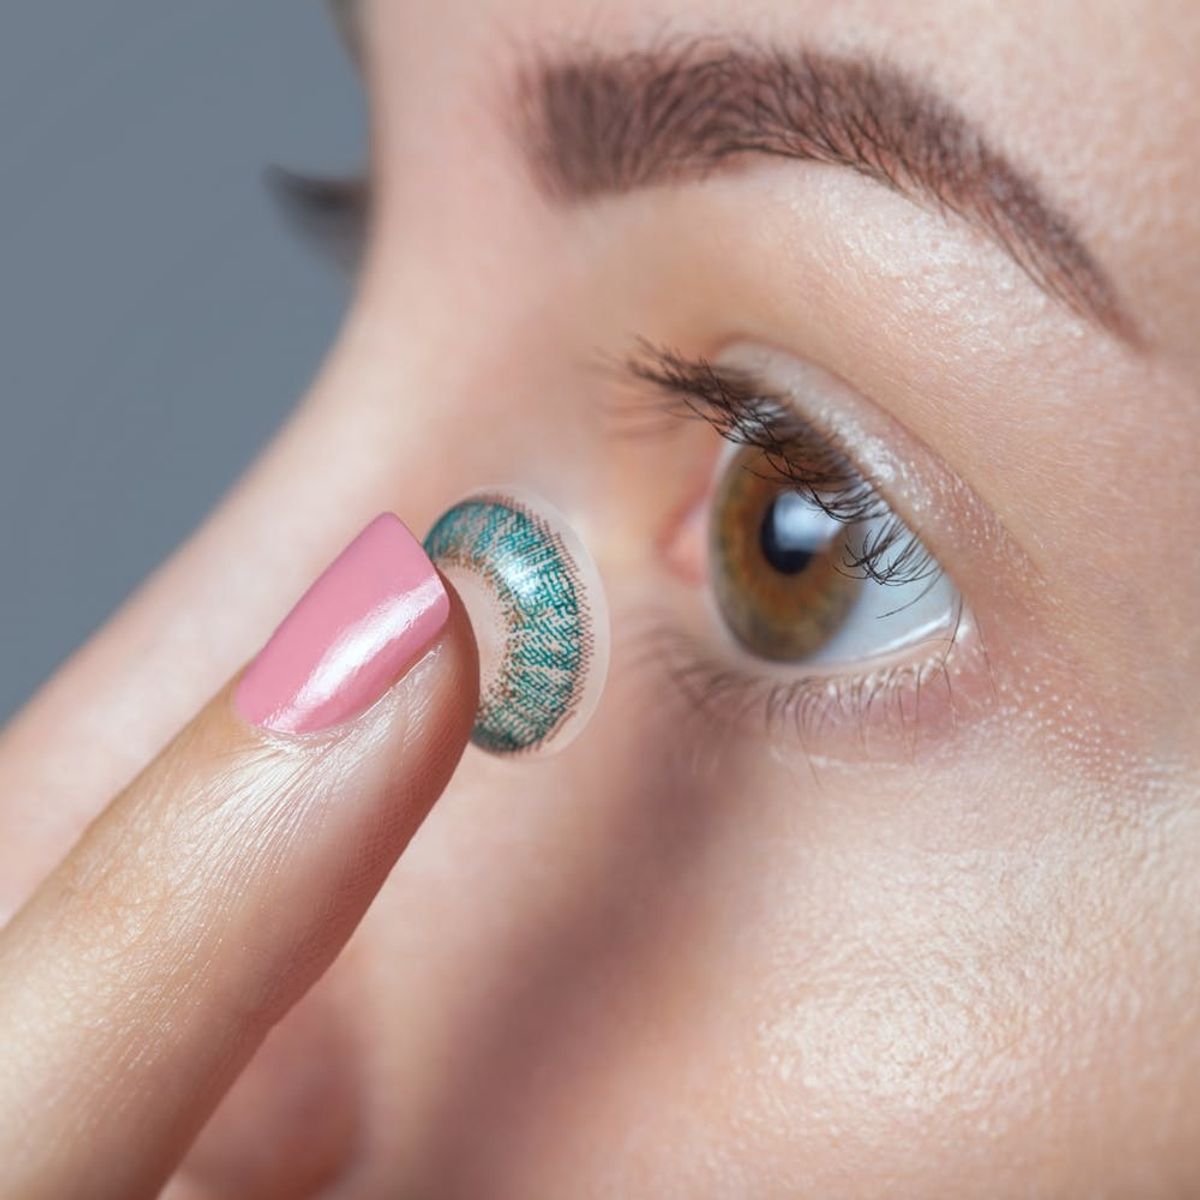 The Scary Truth Behind Halloween’s Ever-Popular Colorful Contacts